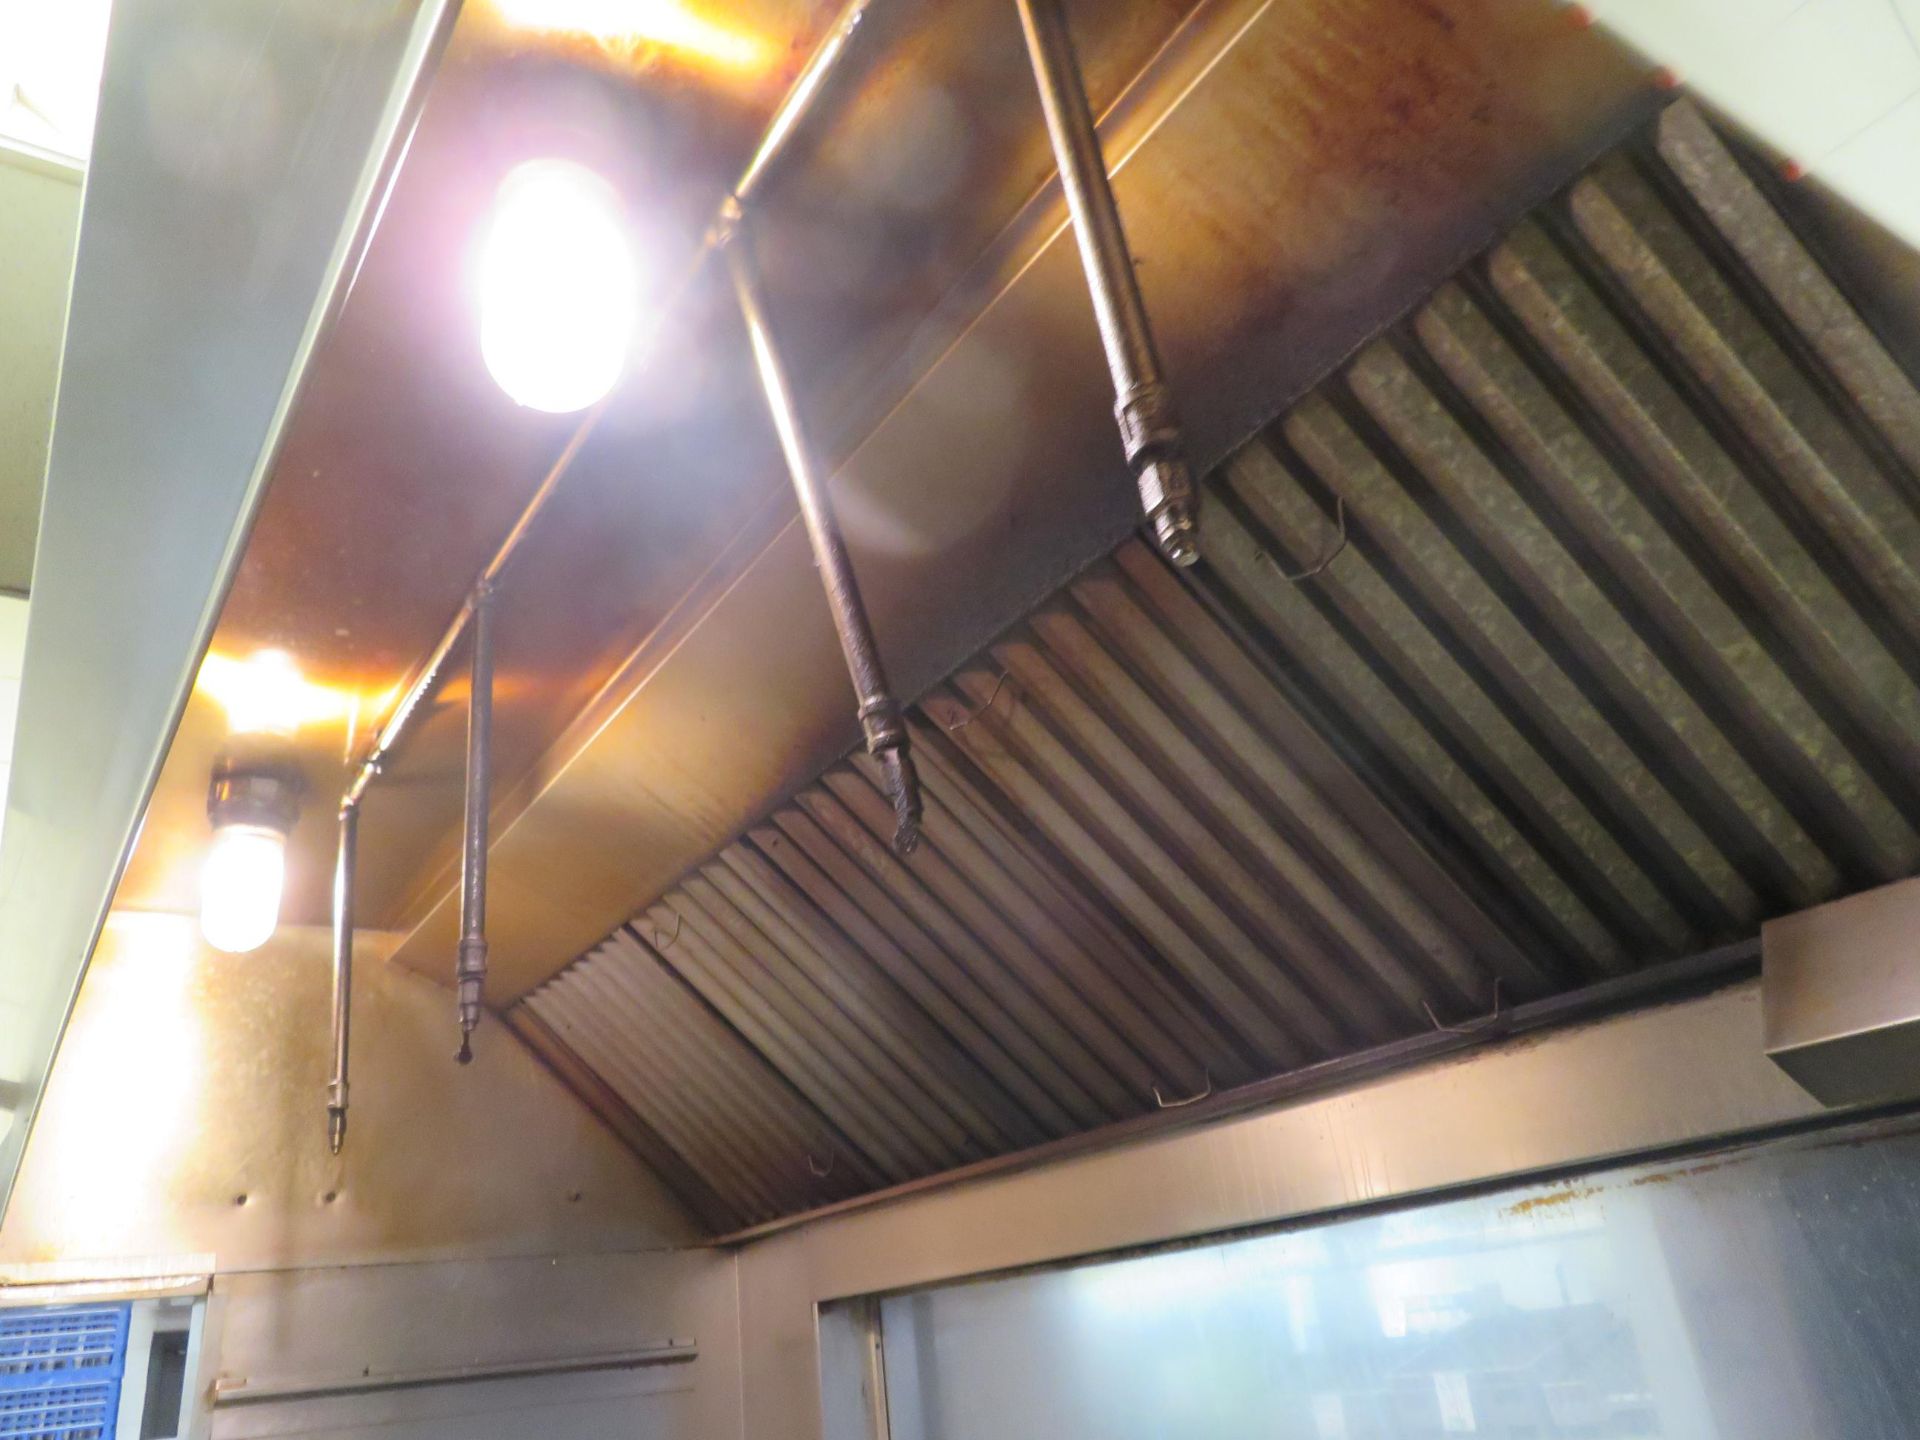 HCE ventilation hood with C02 system approx. 96"w x 47"d - Image 2 of 3